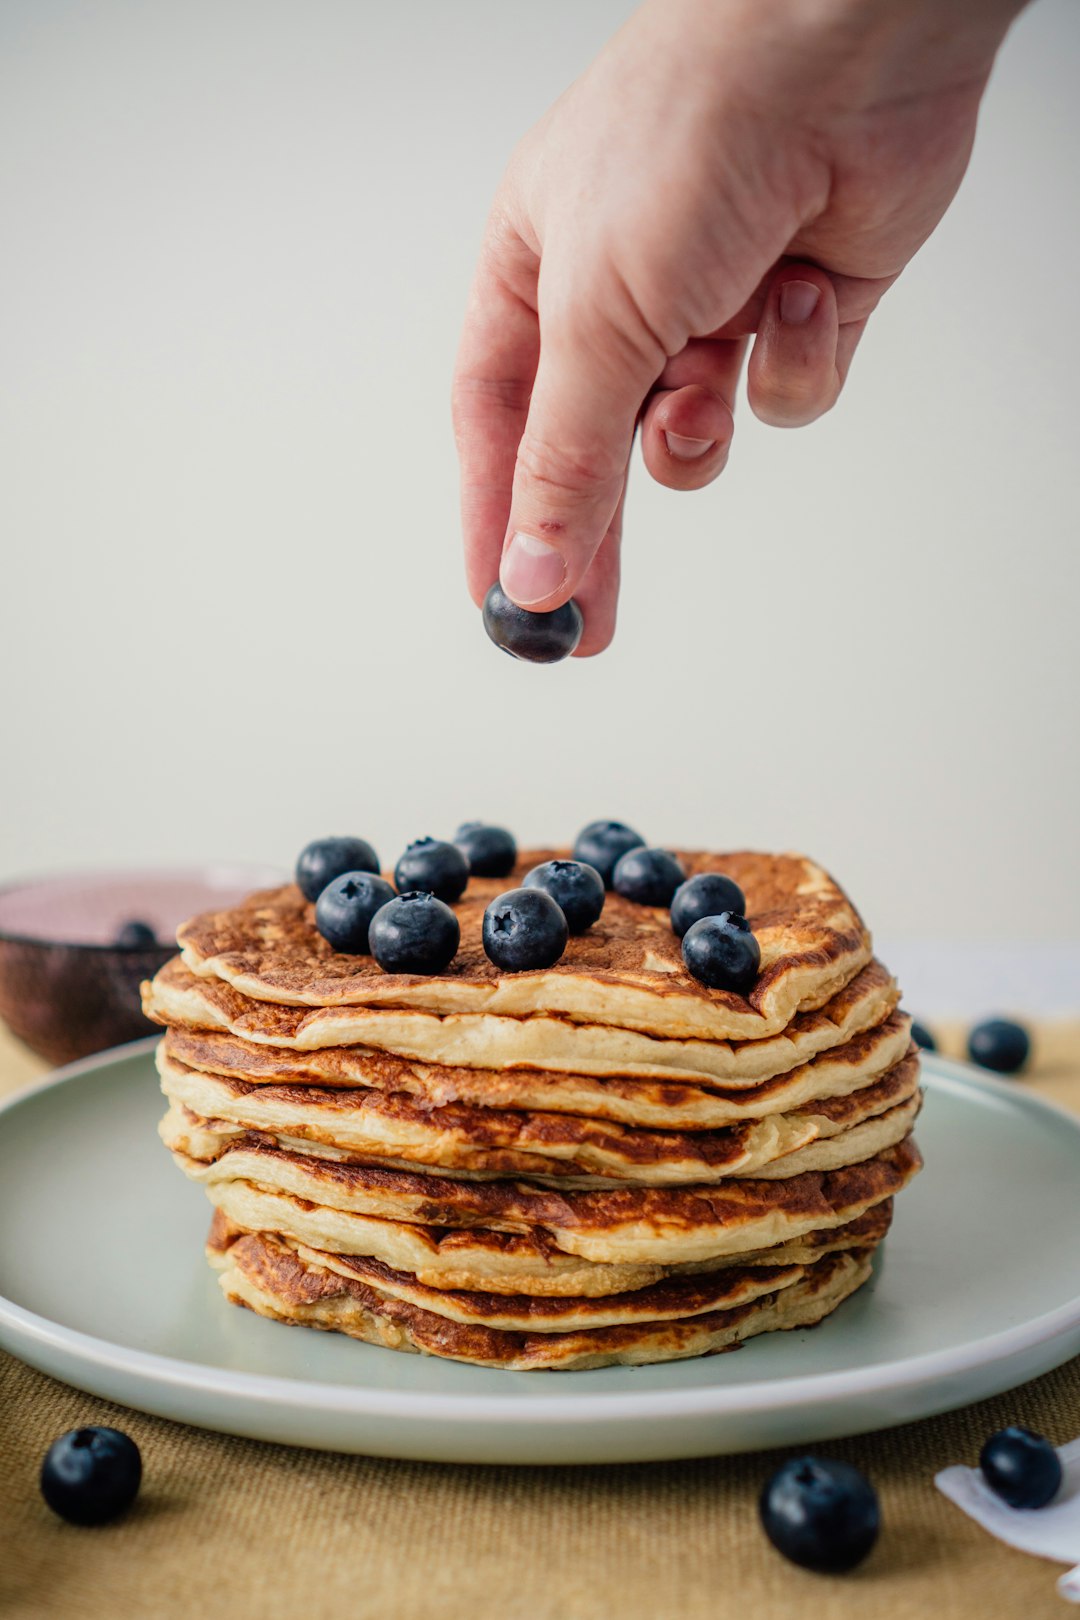 person holding a plate of pancakes with black berries